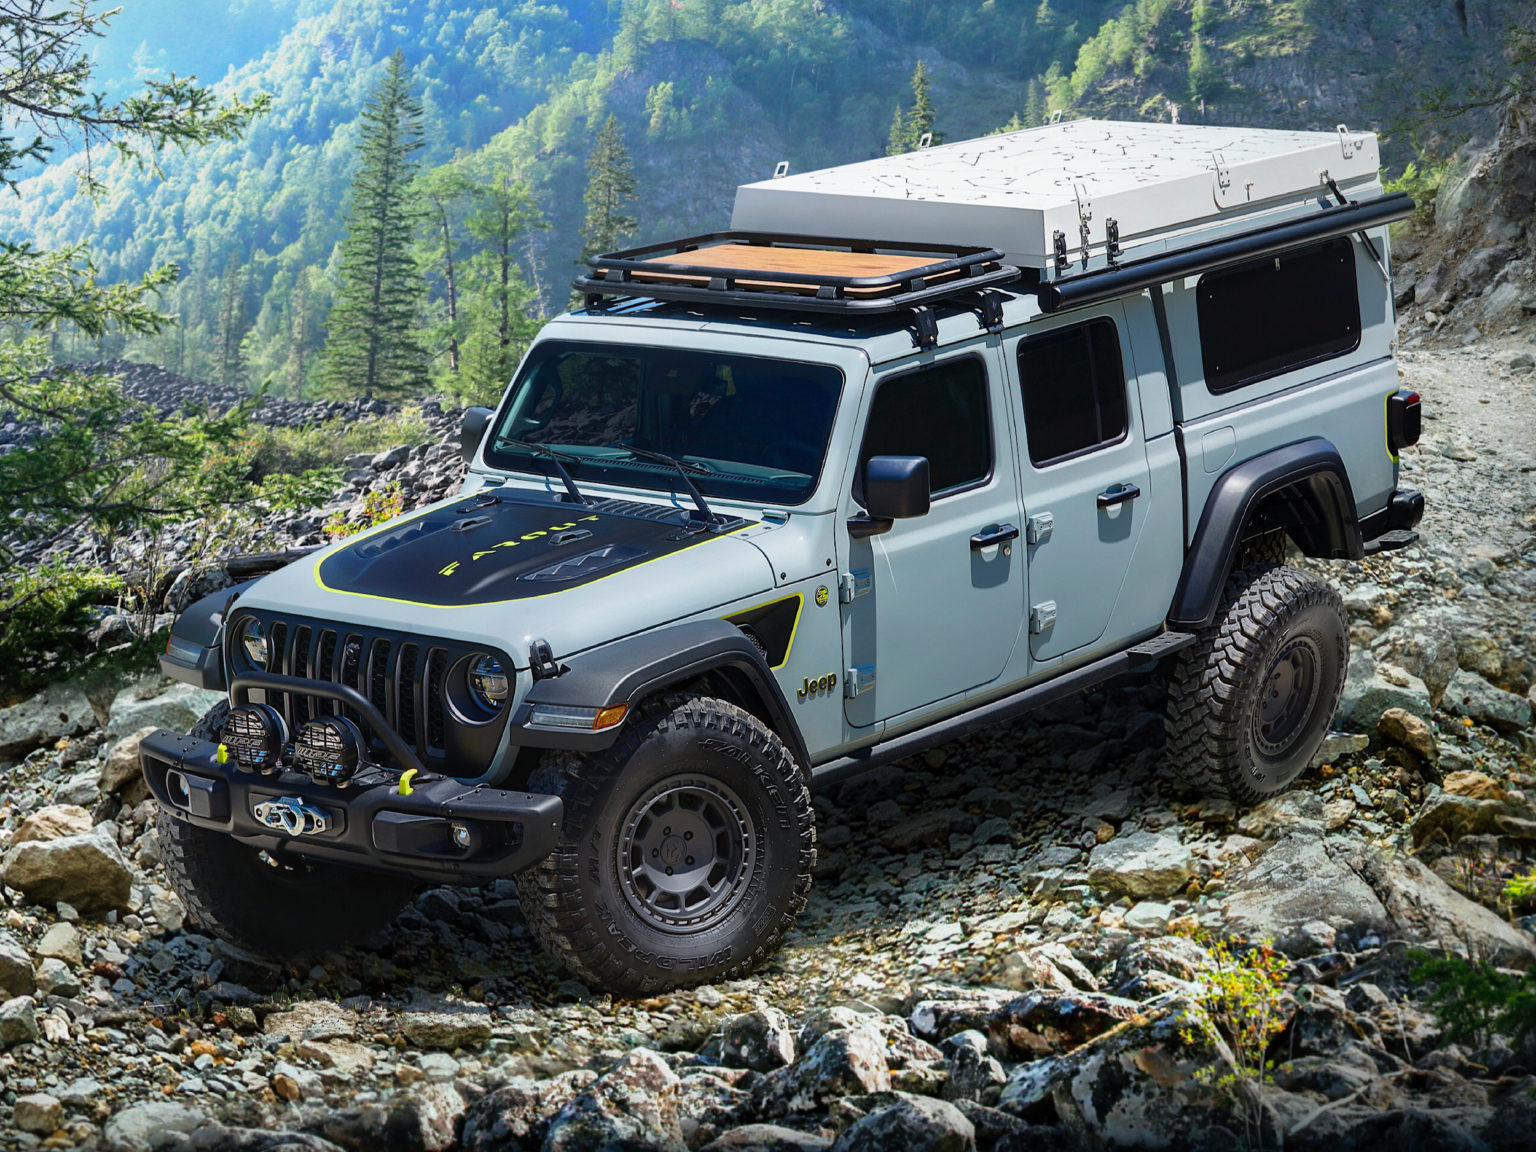 The Jeep Gladiator Farout pushes the boundaries of glad